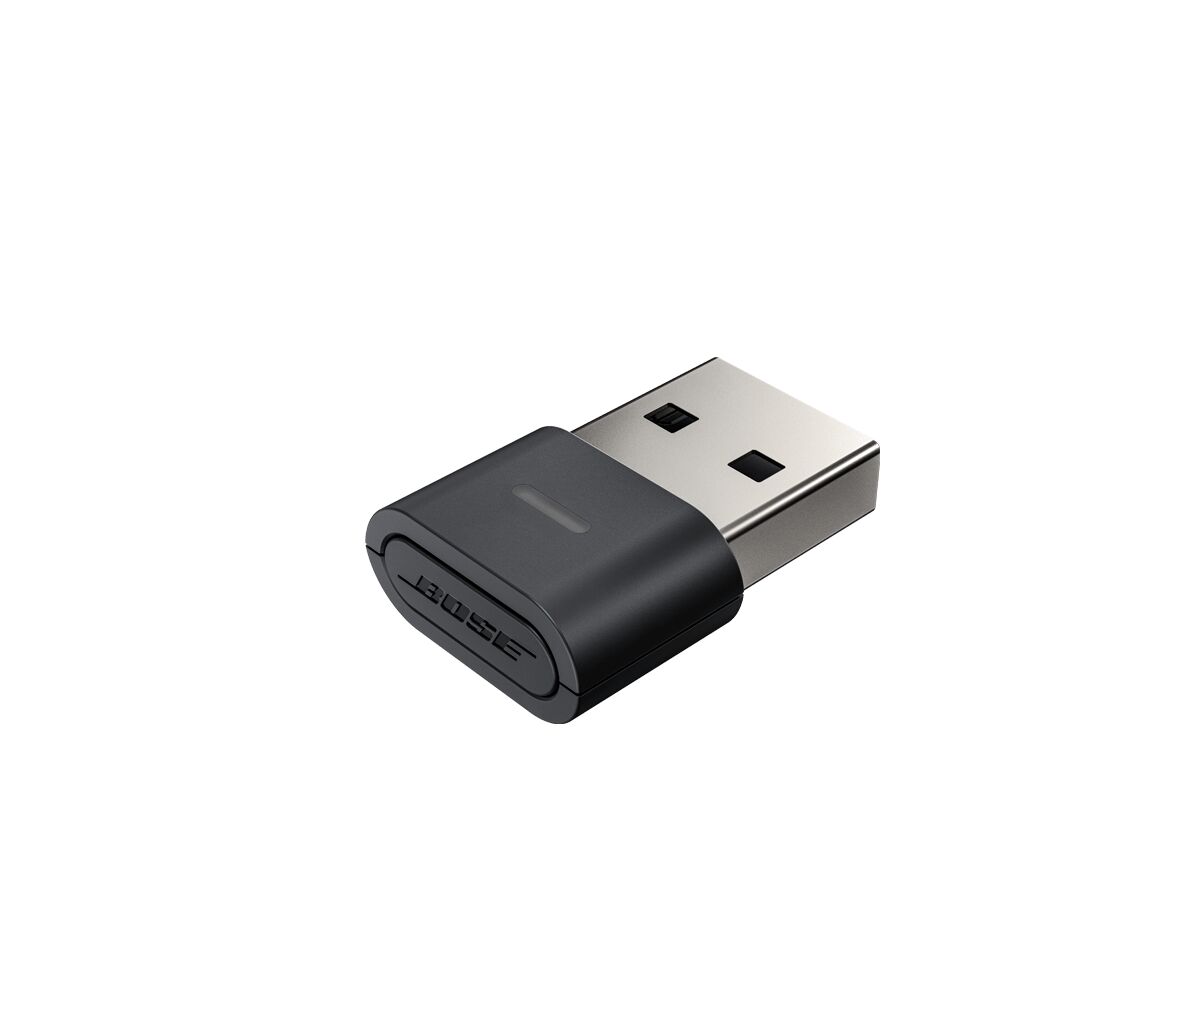 Bose USB Link Bluetooth Module USB Module for Seamless Bluetooth Connections to Your PC